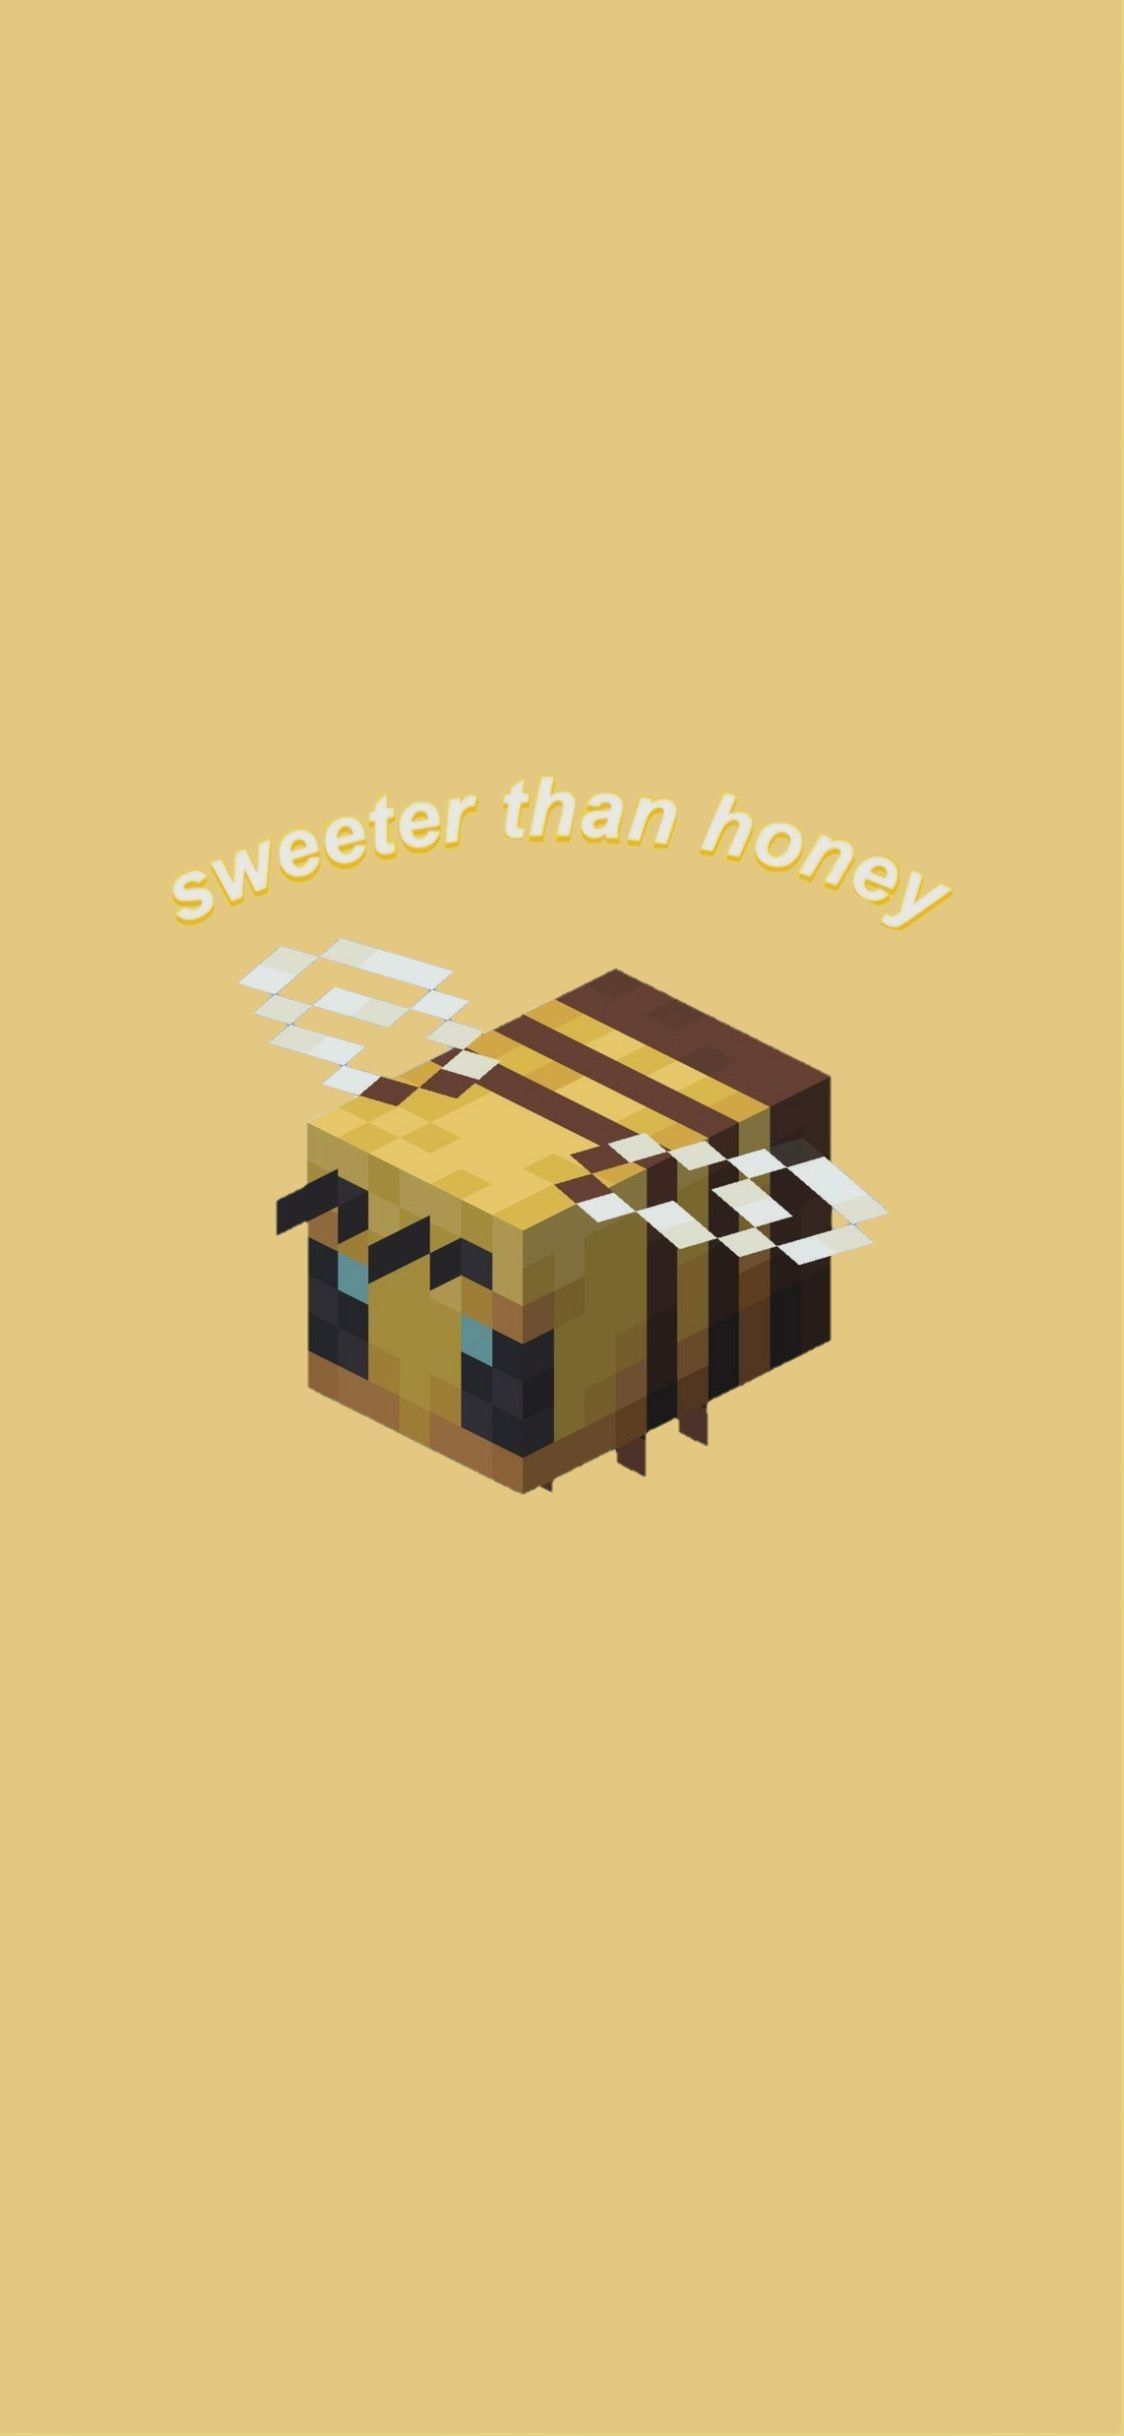 The image of a bee with text that says sweeter than honey - Bee, Minecraft